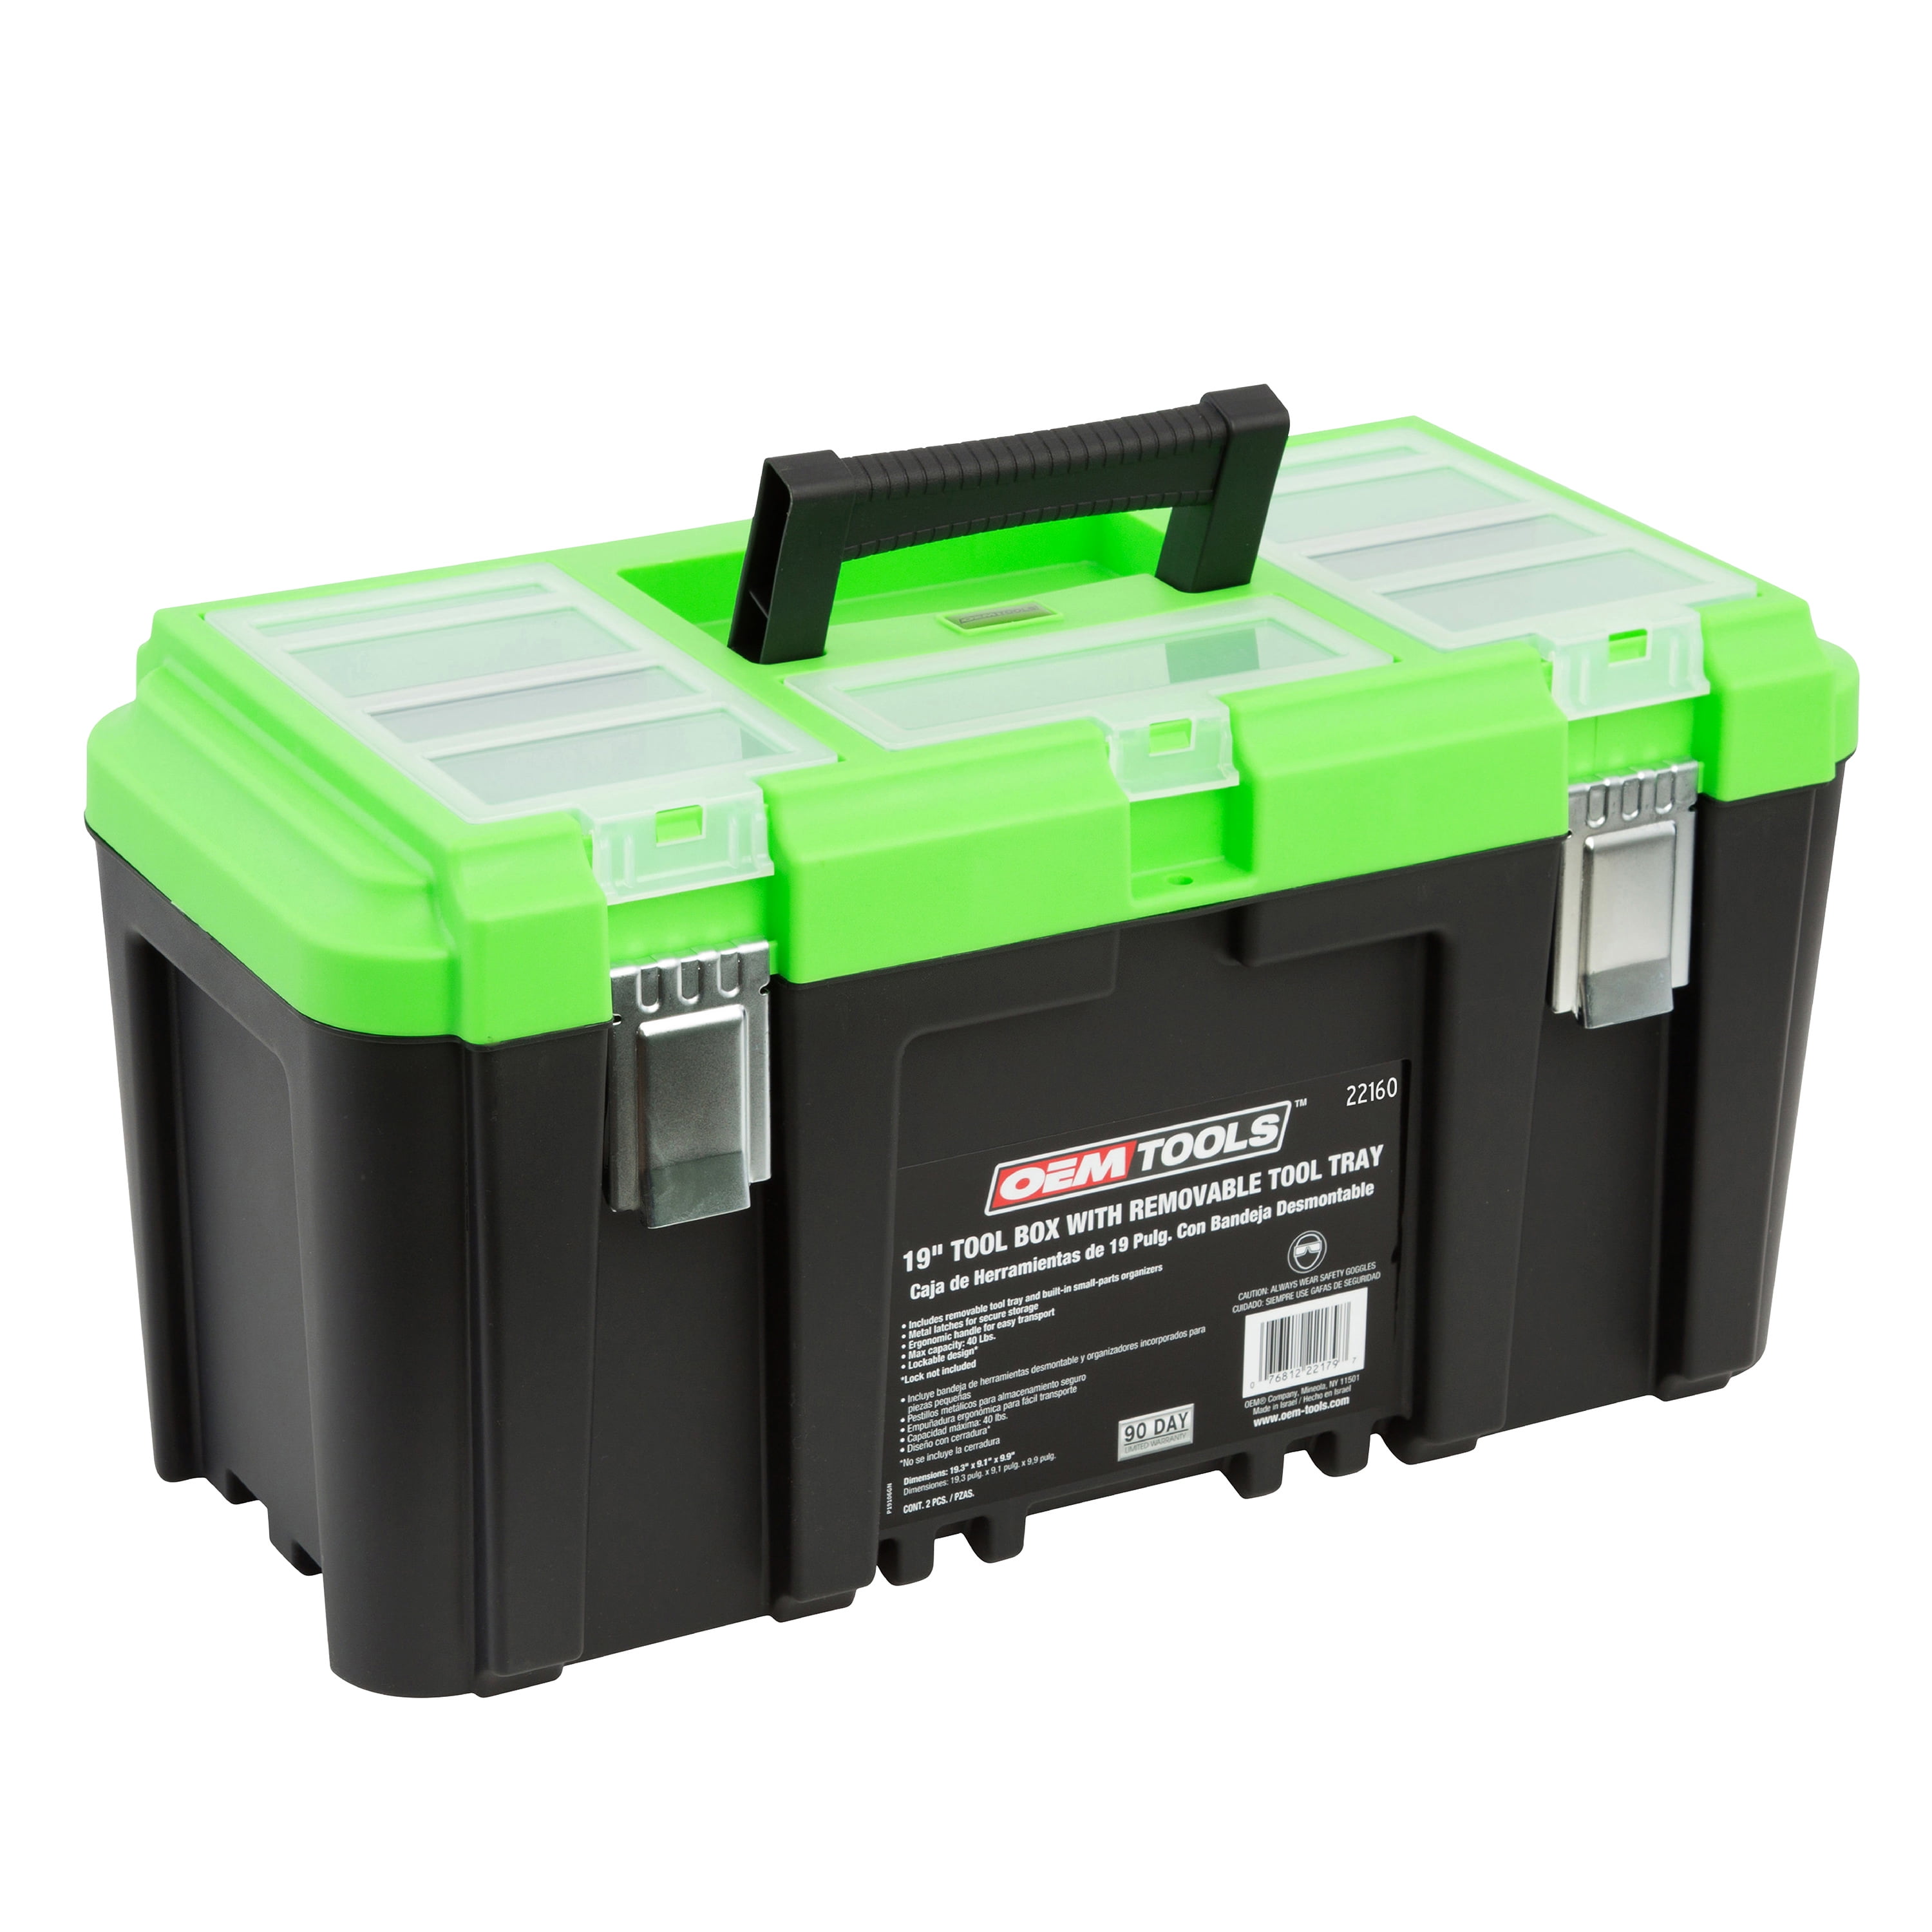 OEMTOOLS 22180 Tool Box Set Includes 19 Tool Box 12.5 Tool Box with Removable Tool Tray 